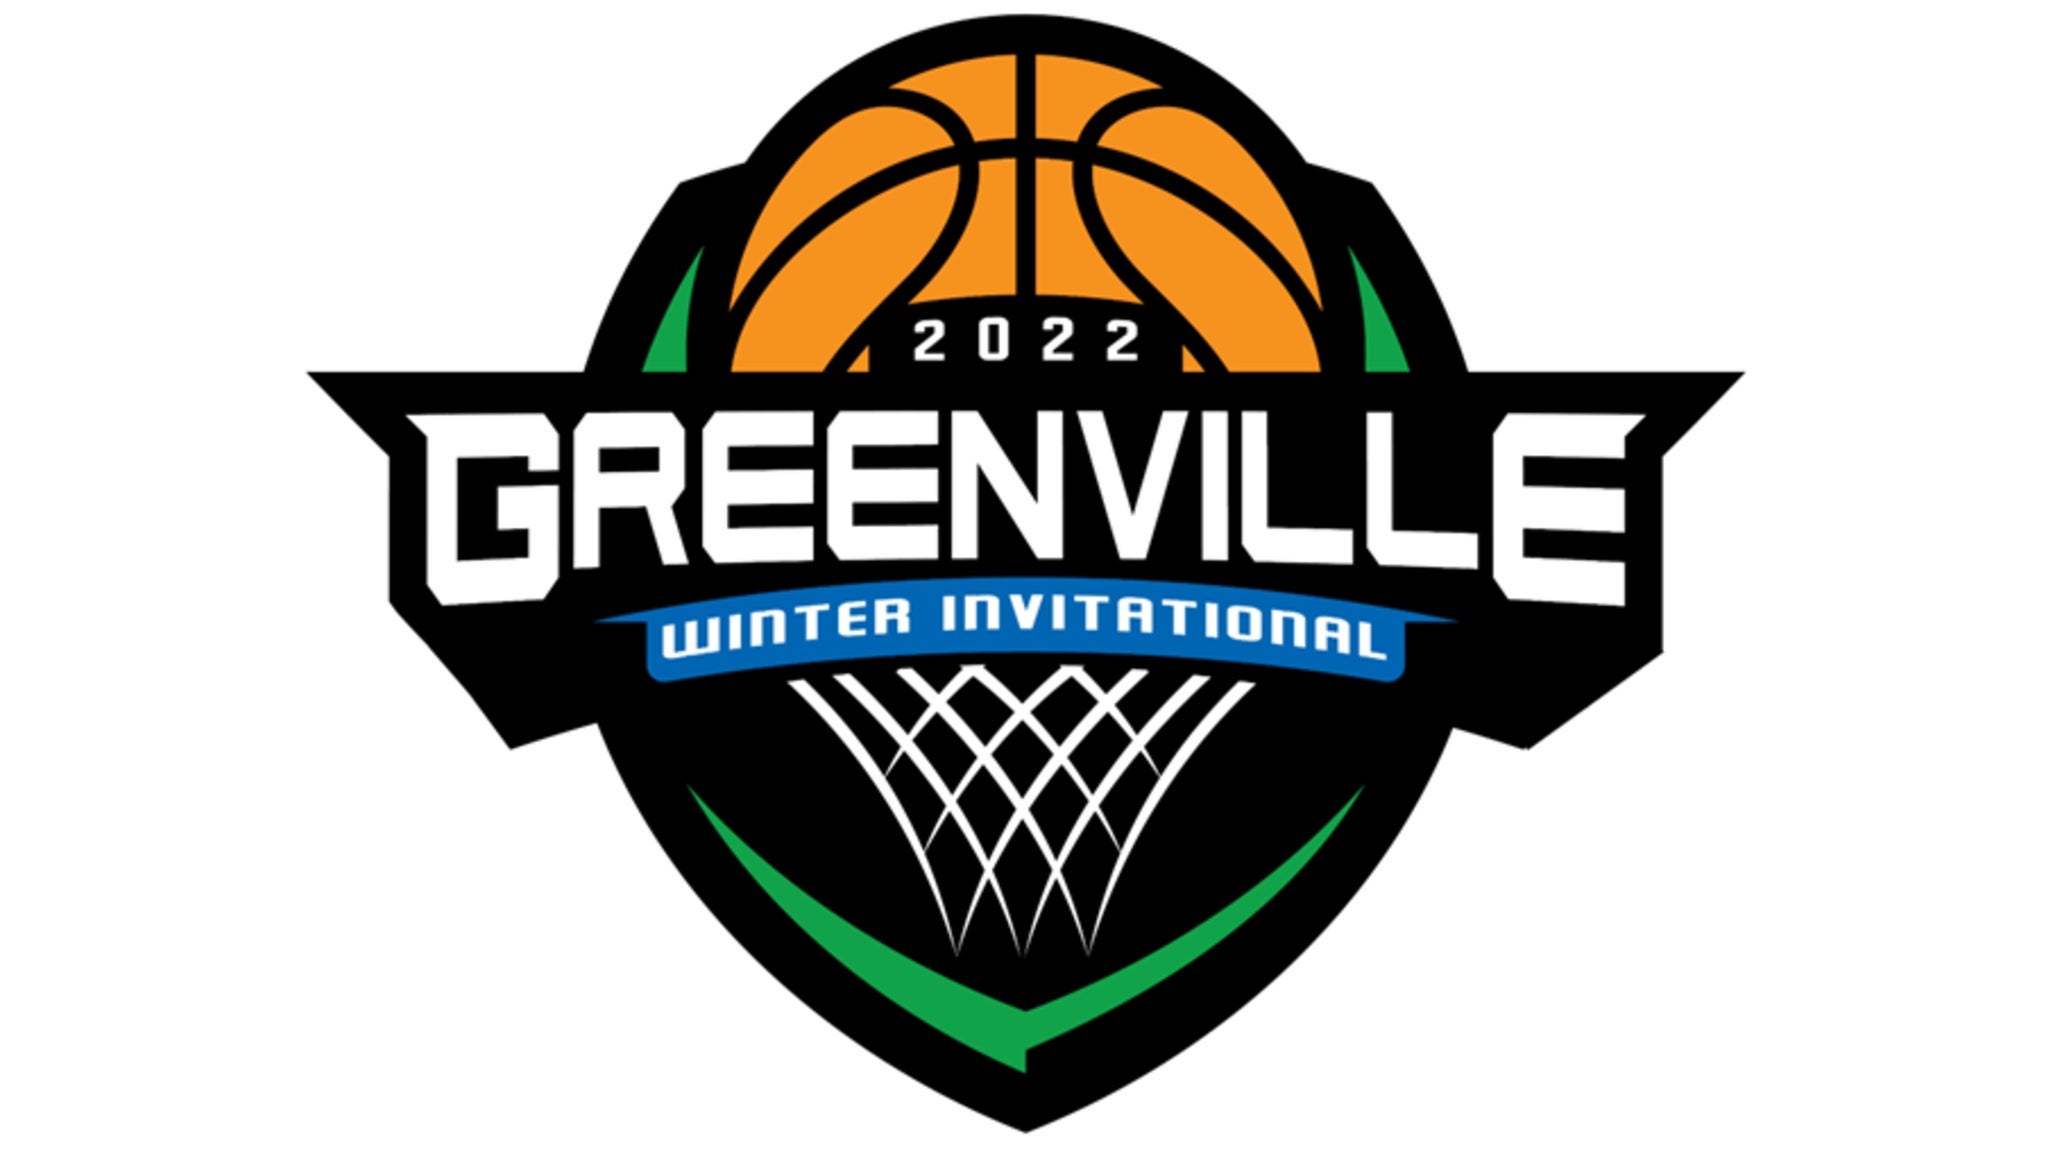 Greenville Winter Invitational in Greenville promo photo for VIP Package presale offer code